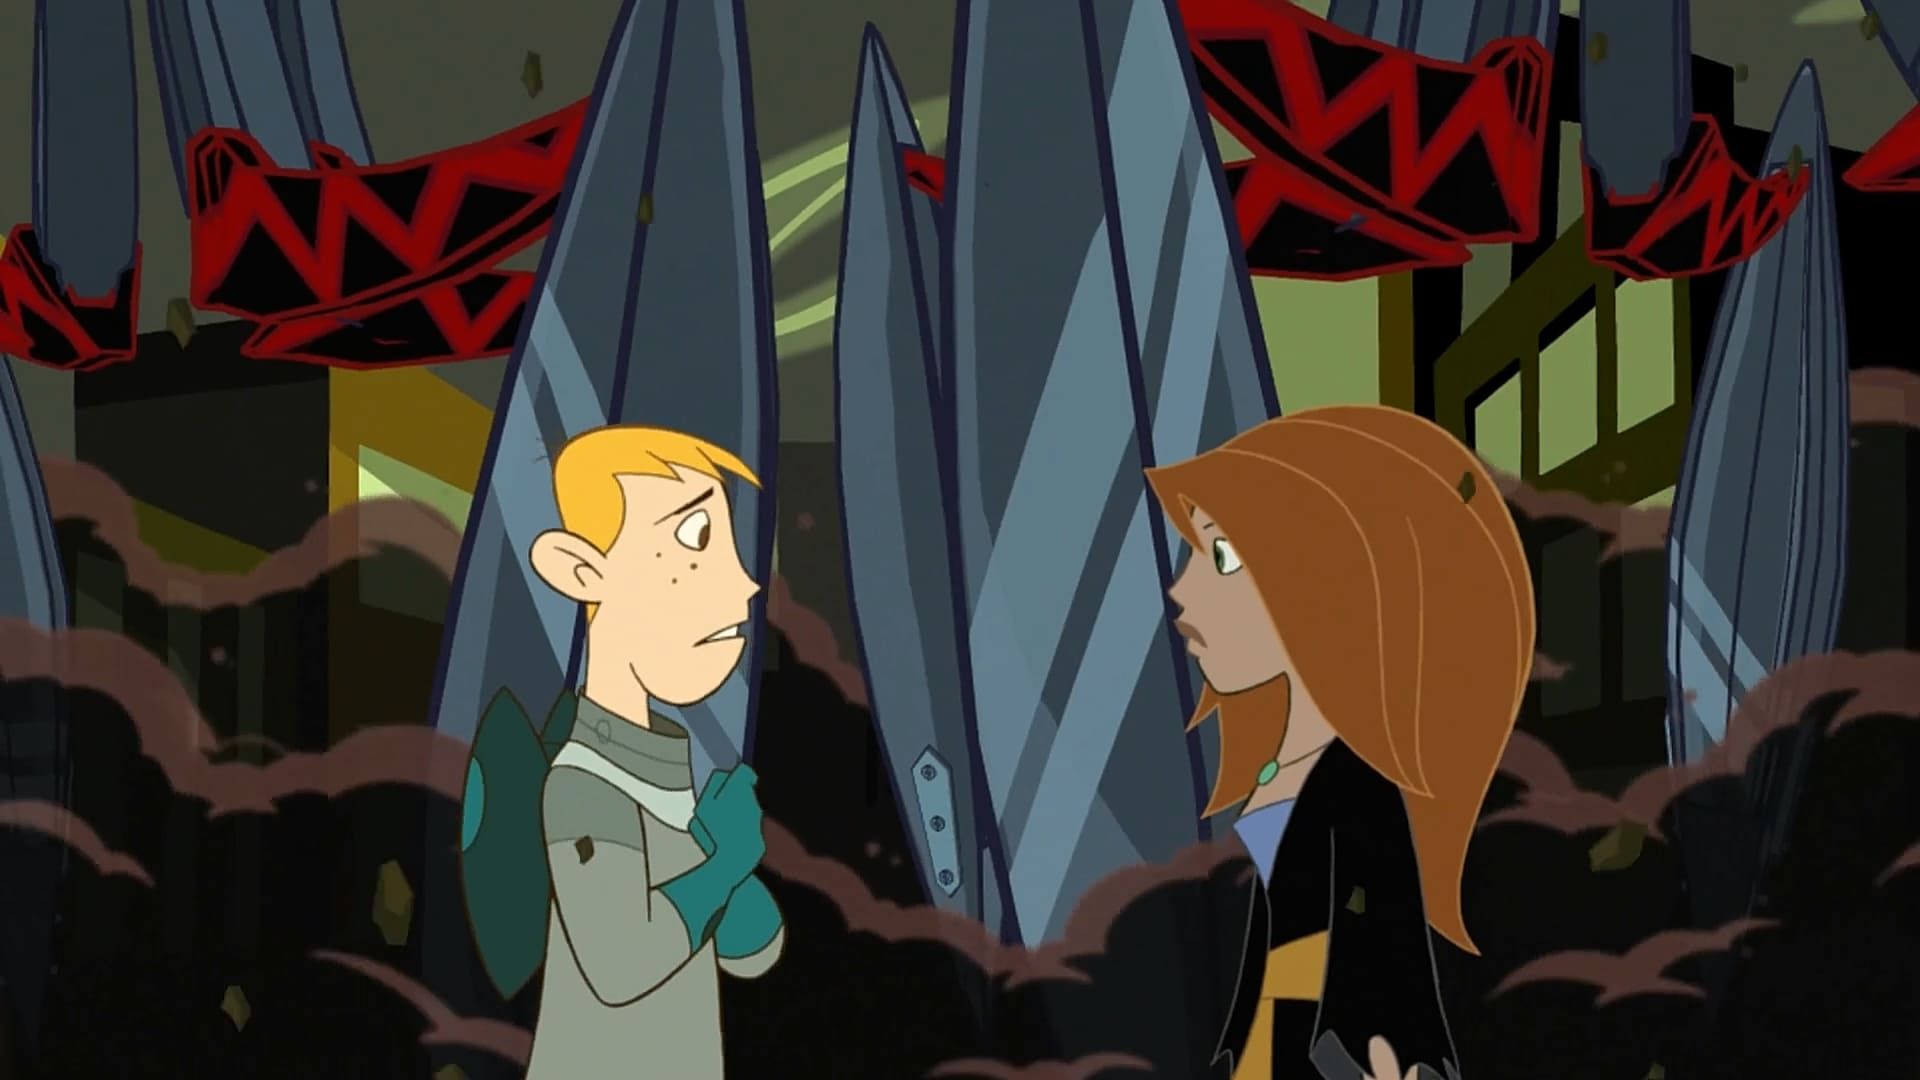 Kim Possible background